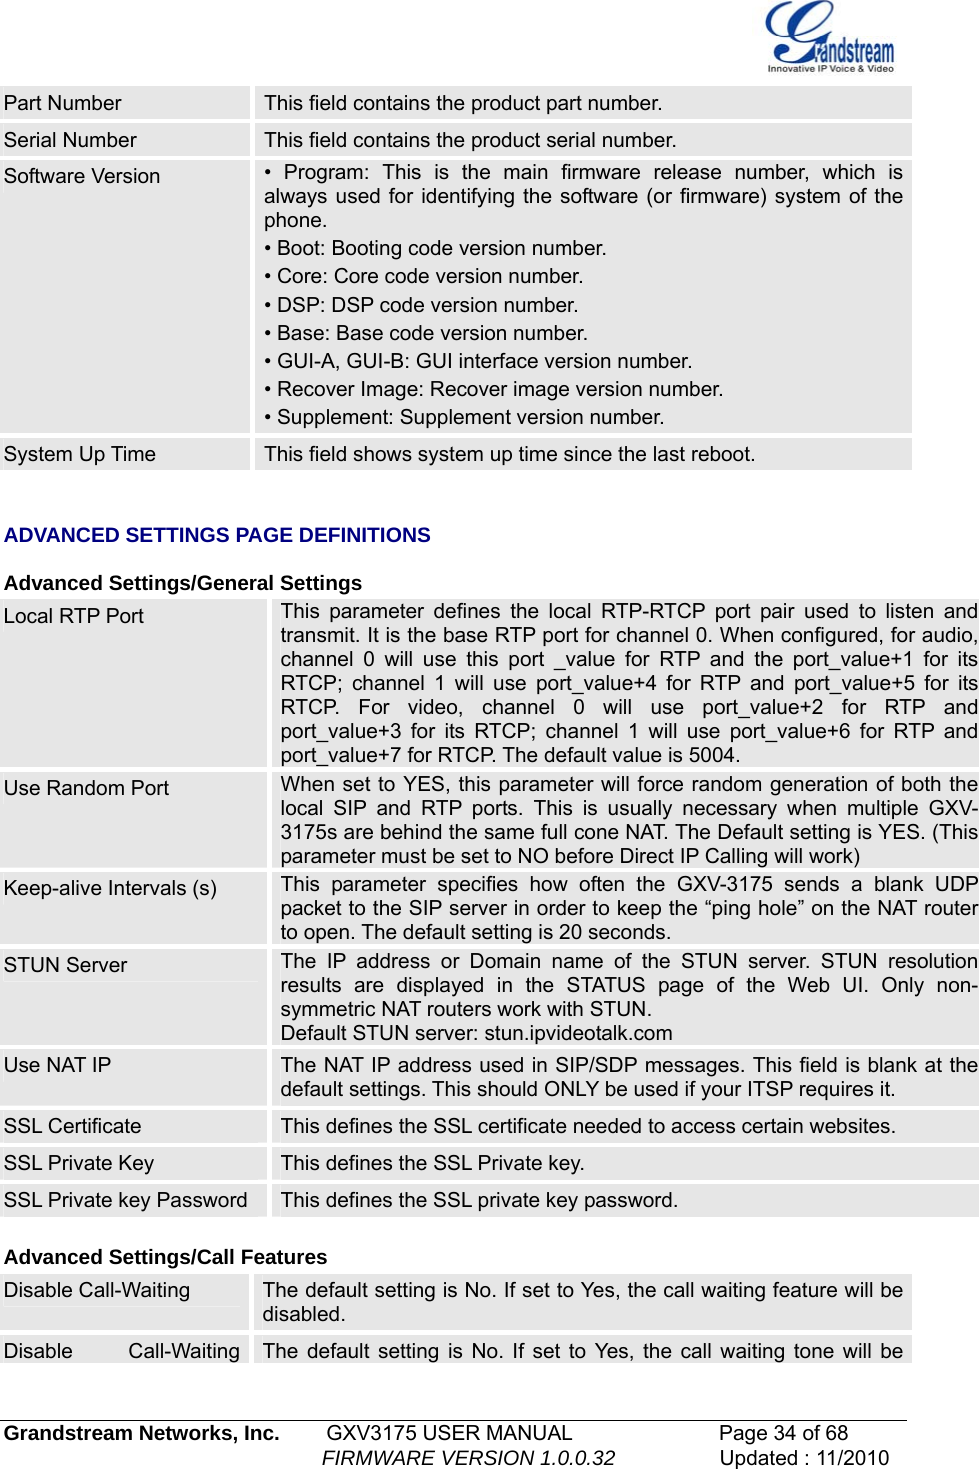   Grandstream Networks, Inc.        GXV3175 USER MANUAL                      Page 34 of 68                                                        FIRMWARE VERSION 1.0.0.32                  Updated : 11/2010  Part Number  This field contains the product part number. Serial Number  This field contains the product serial number. Software Version  • Program: This is the main firmware release number, which is always used for identifying the software (or firmware) system of the phone. • Boot: Booting code version number. • Core: Core code version number. • DSP: DSP code version number. • Base: Base code version number. • GUI-A, GUI-B: GUI interface version number. • Recover Image: Recover image version number. • Supplement: Supplement version number. System Up Time  This field shows system up time since the last reboot.   ADVANCED SETTINGS PAGE DEFINITIONS  Advanced Settings/General Settings Local RTP Port  This parameter defines the local RTP-RTCP port pair used to listen and transmit. It is the base RTP port for channel 0. When configured, for audio, channel 0 will use this port _value for RTP and the port_value+1 for its RTCP; channel 1 will use port_value+4 for RTP and port_value+5 for its RTCP. For video, channel 0 will use port_value+2 for RTP and port_value+3 for its RTCP; channel 1 will use port_value+6 for RTP and port_value+7 for RTCP. The default value is 5004. Use Random Port  When set to YES, this parameter will force random generation of both the local SIP and RTP ports. This is usually necessary when multiple GXV-3175s are behind the same full cone NAT. The Default setting is YES. (This parameter must be set to NO before Direct IP Calling will work) Keep-alive Intervals (s)  This parameter specifies how often the GXV-3175 sends a blank UDP packet to the SIP server in order to keep the “ping hole” on the NAT router to open. The default setting is 20 seconds. STUN Server  The IP address or Domain name of the STUN server. STUN resolution results are displayed in the STATUS page of the Web UI. Only non-symmetric NAT routers work with STUN. Default STUN server: stun.ipvideotalk.com Use NAT IP  The NAT IP address used in SIP/SDP messages. This field is blank at the default settings. This should ONLY be used if your ITSP requires it. SSL Certificate  This defines the SSL certificate needed to access certain websites. SSL Private Key  This defines the SSL Private key. SSL Private key Password  This defines the SSL private key password.   Advanced Settings/Call Features Disable Call-Waiting  The default setting is No. If set to Yes, the call waiting feature will be disabled. Disable Call-Waiting The default setting is No. If set to Yes, the call waiting tone will be 